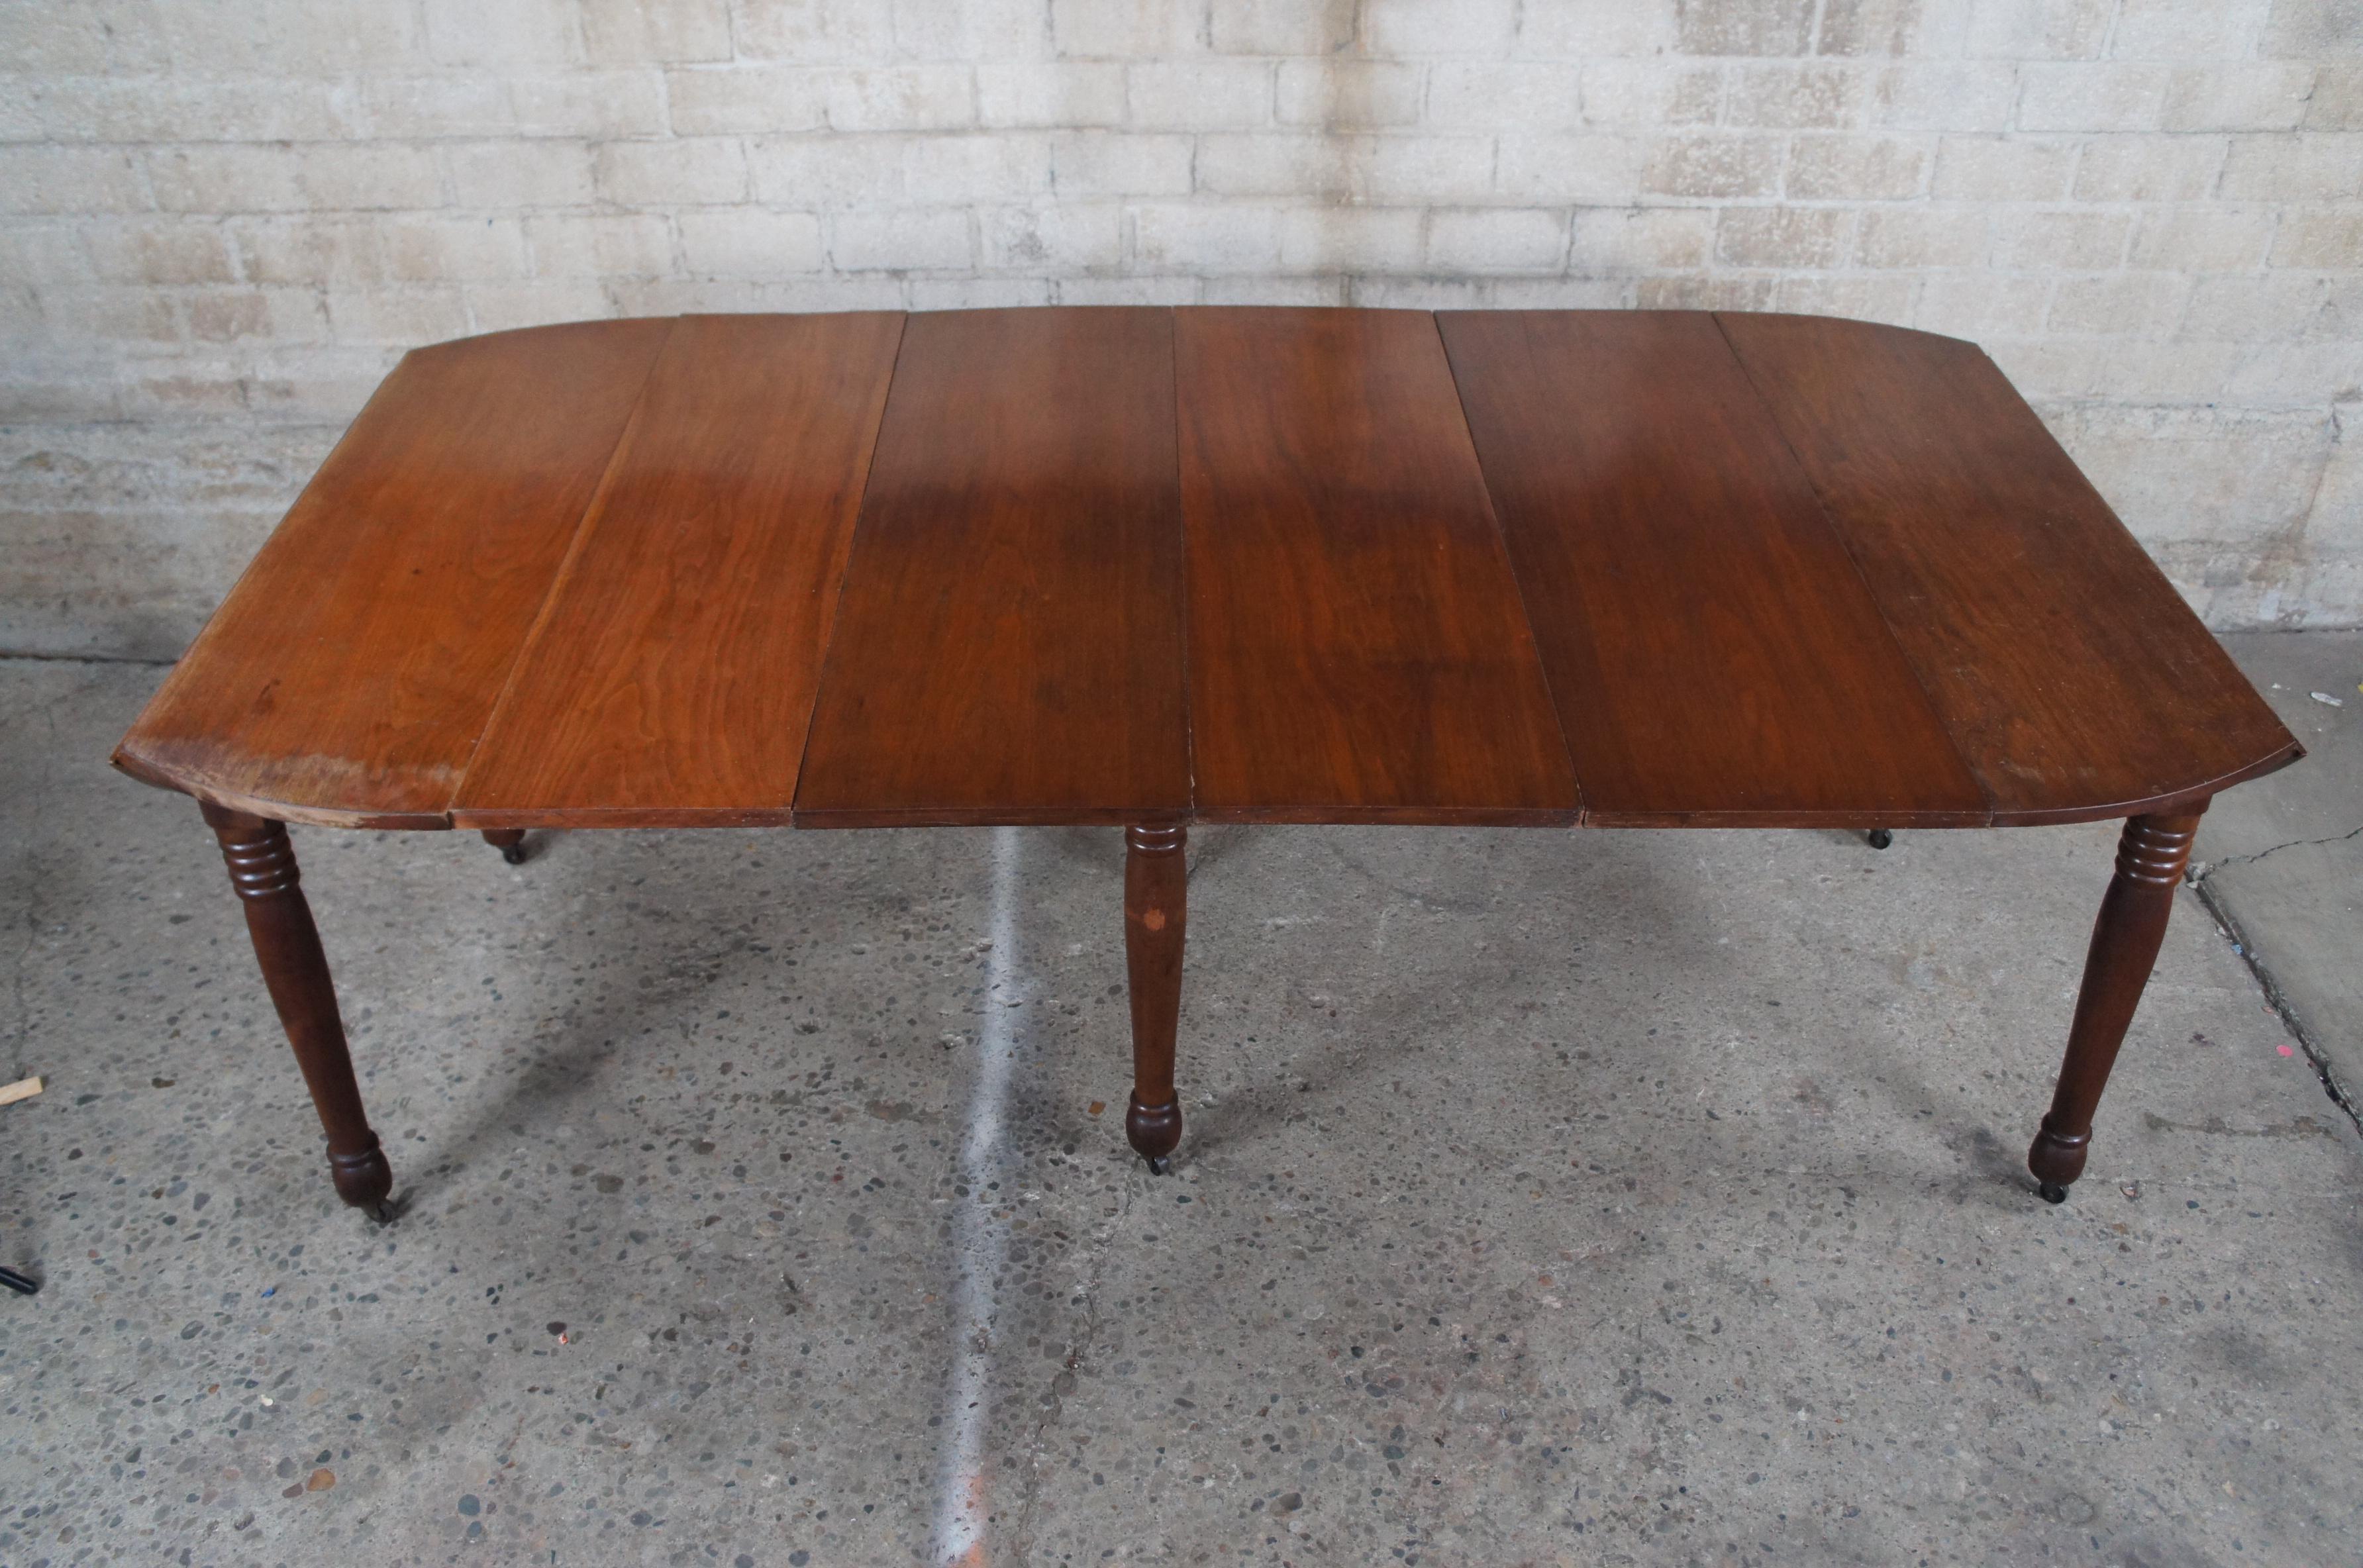 Antique Early American Walnut Extendable Oval Drop Leaf Farmhouse Dining Table 1